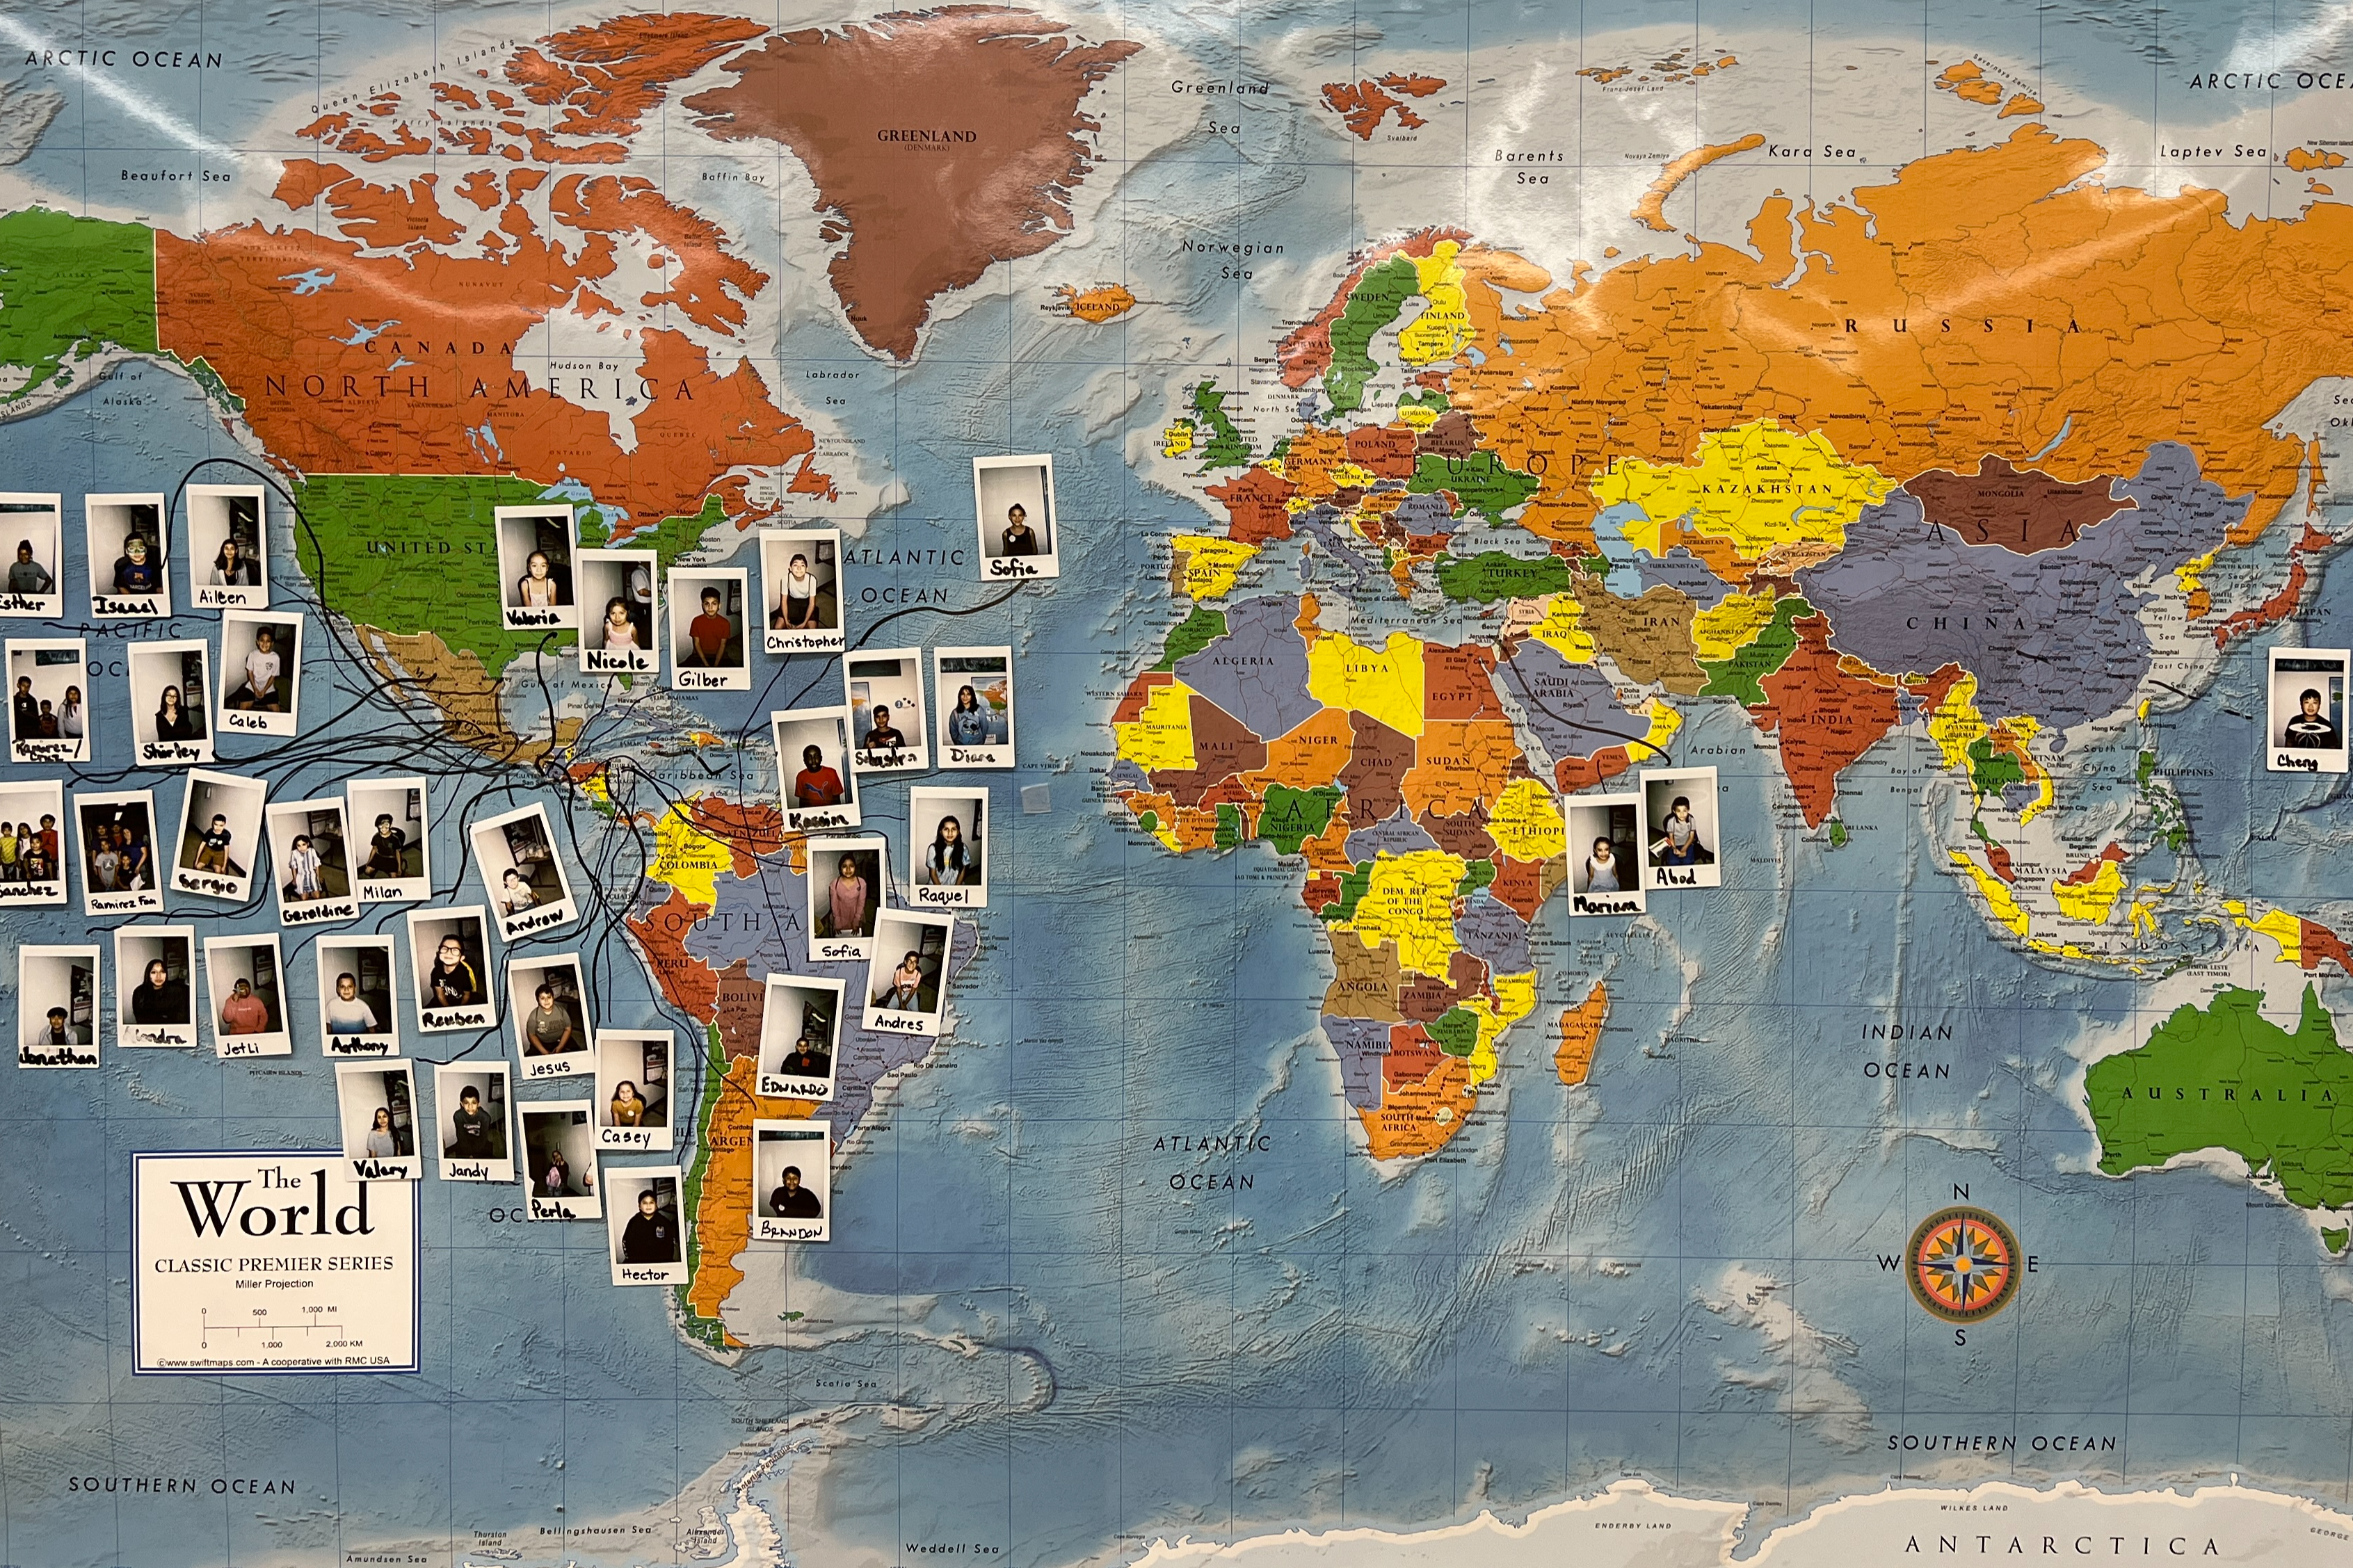 A map is hanging on a wall and ESL students' polaroid photos are pinned to the map over their home countries